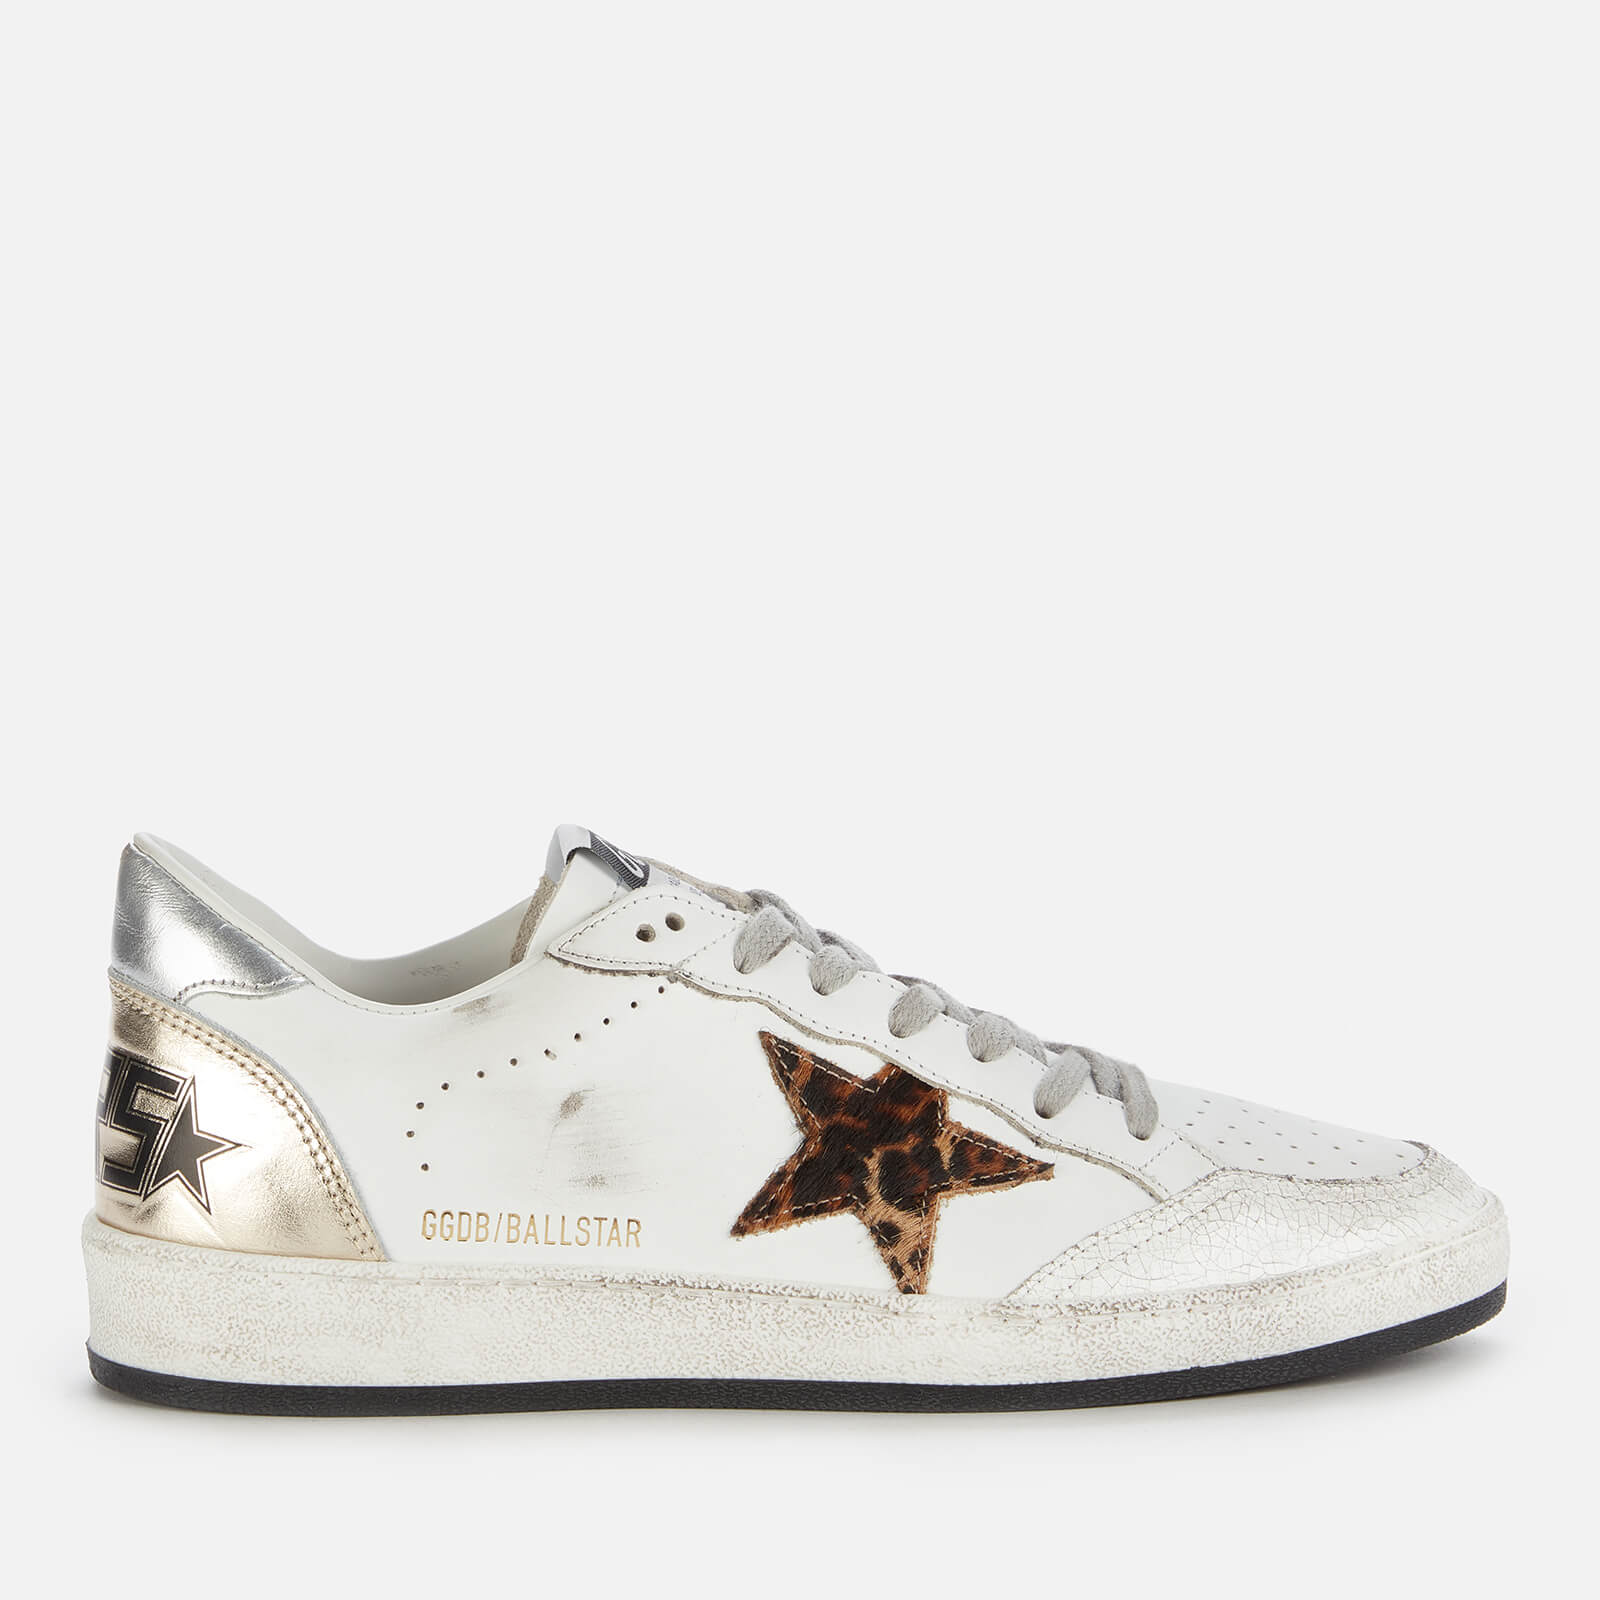 Golden Goose Deluxe Brand Women's Ball Star Leather Trainers - White/Beige Brown - UK 8